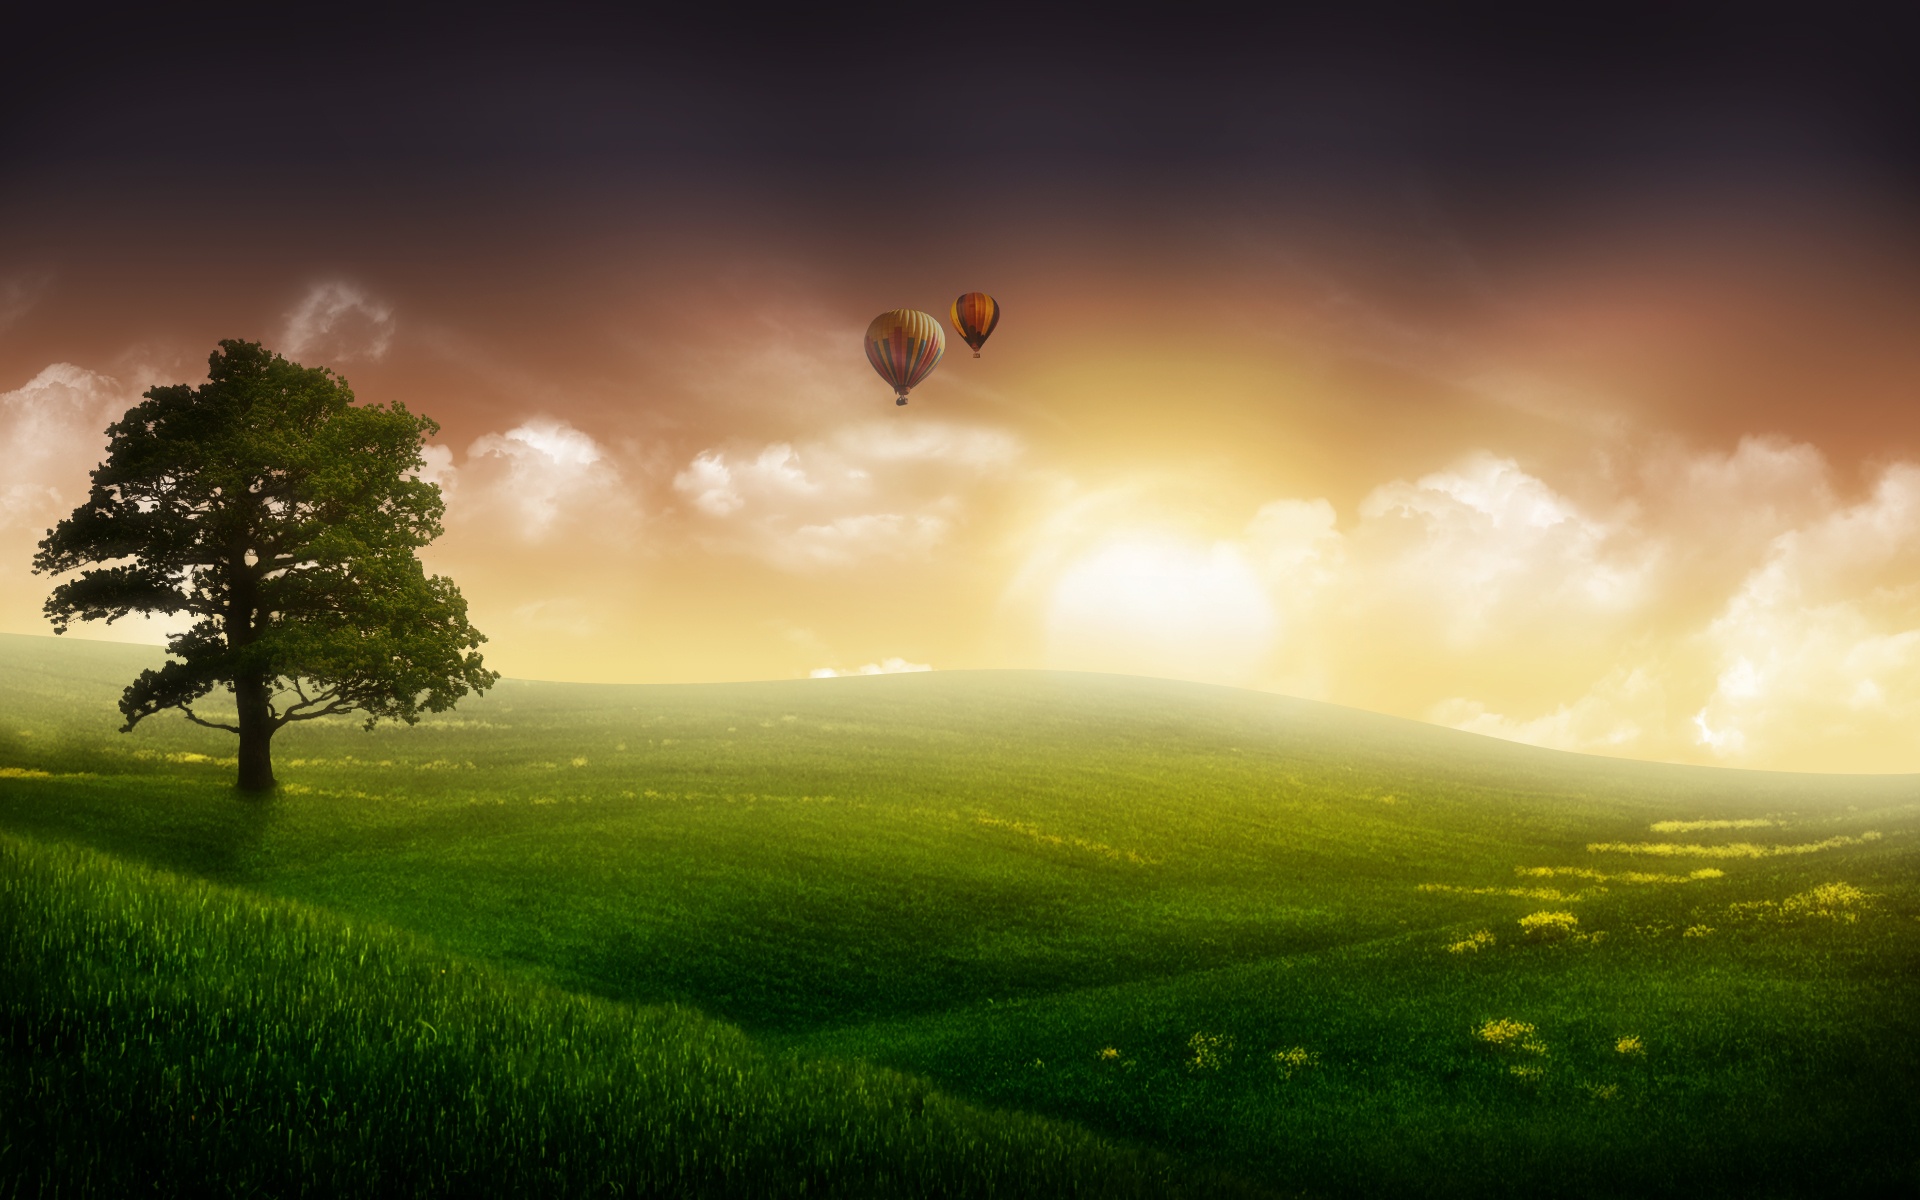 Nature Balloon Ride Wallpapers in jpg format for free download